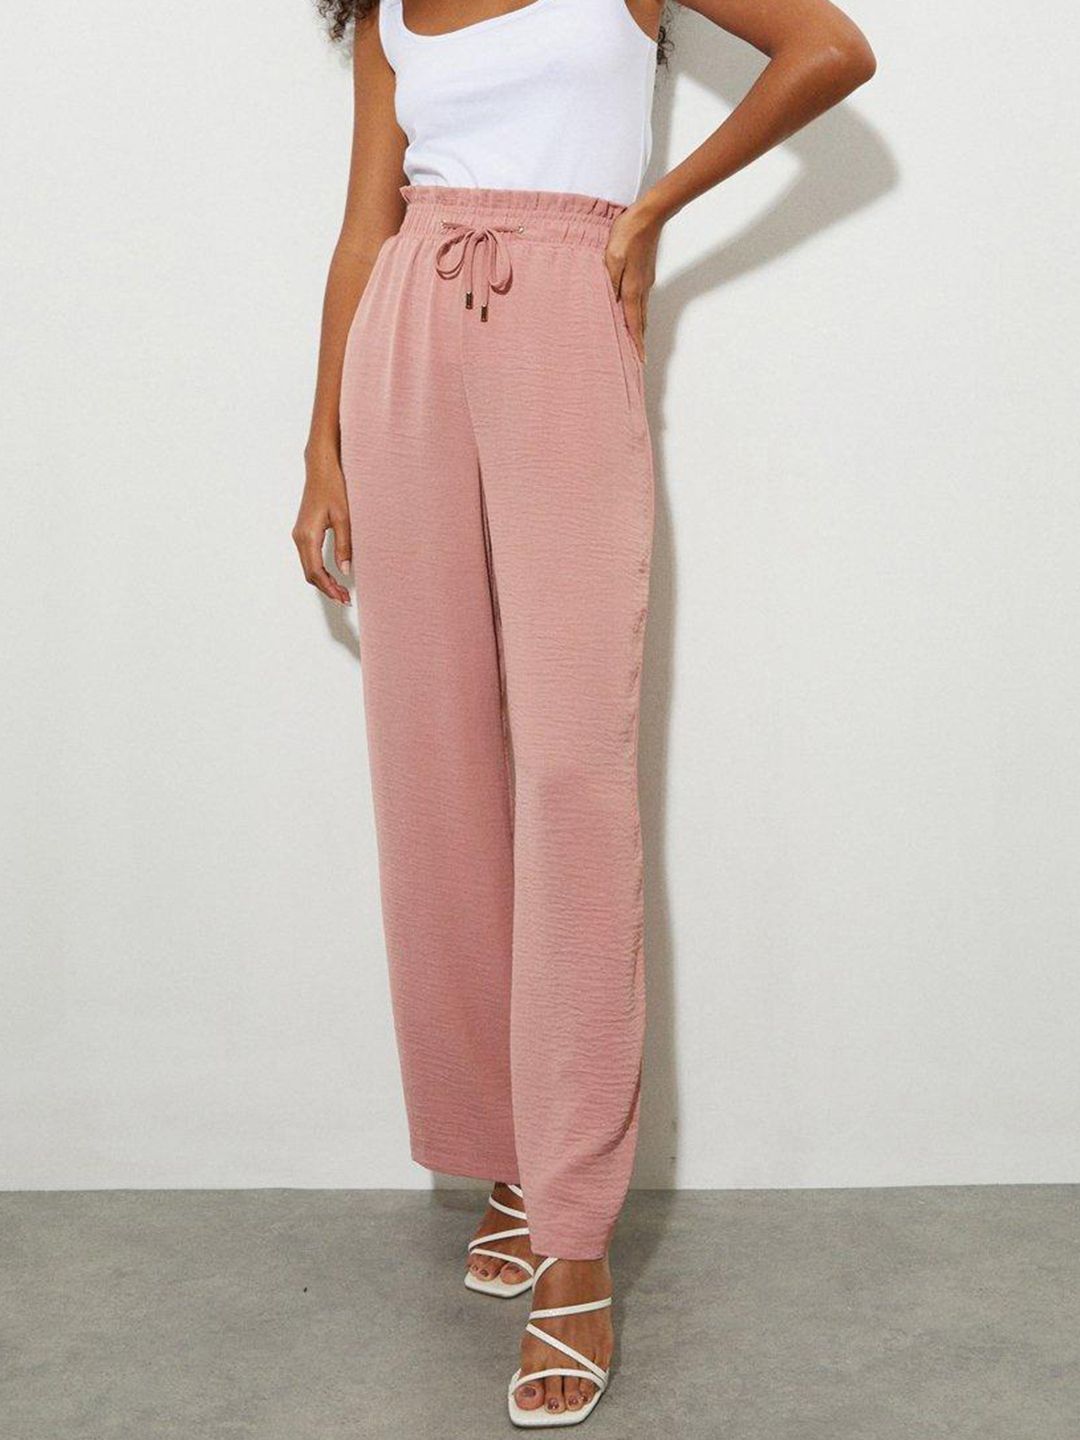 DOROTHY PERKINS Women Dusty Pink Twill Elasticated Waist Wide Leg Trouser Price in India